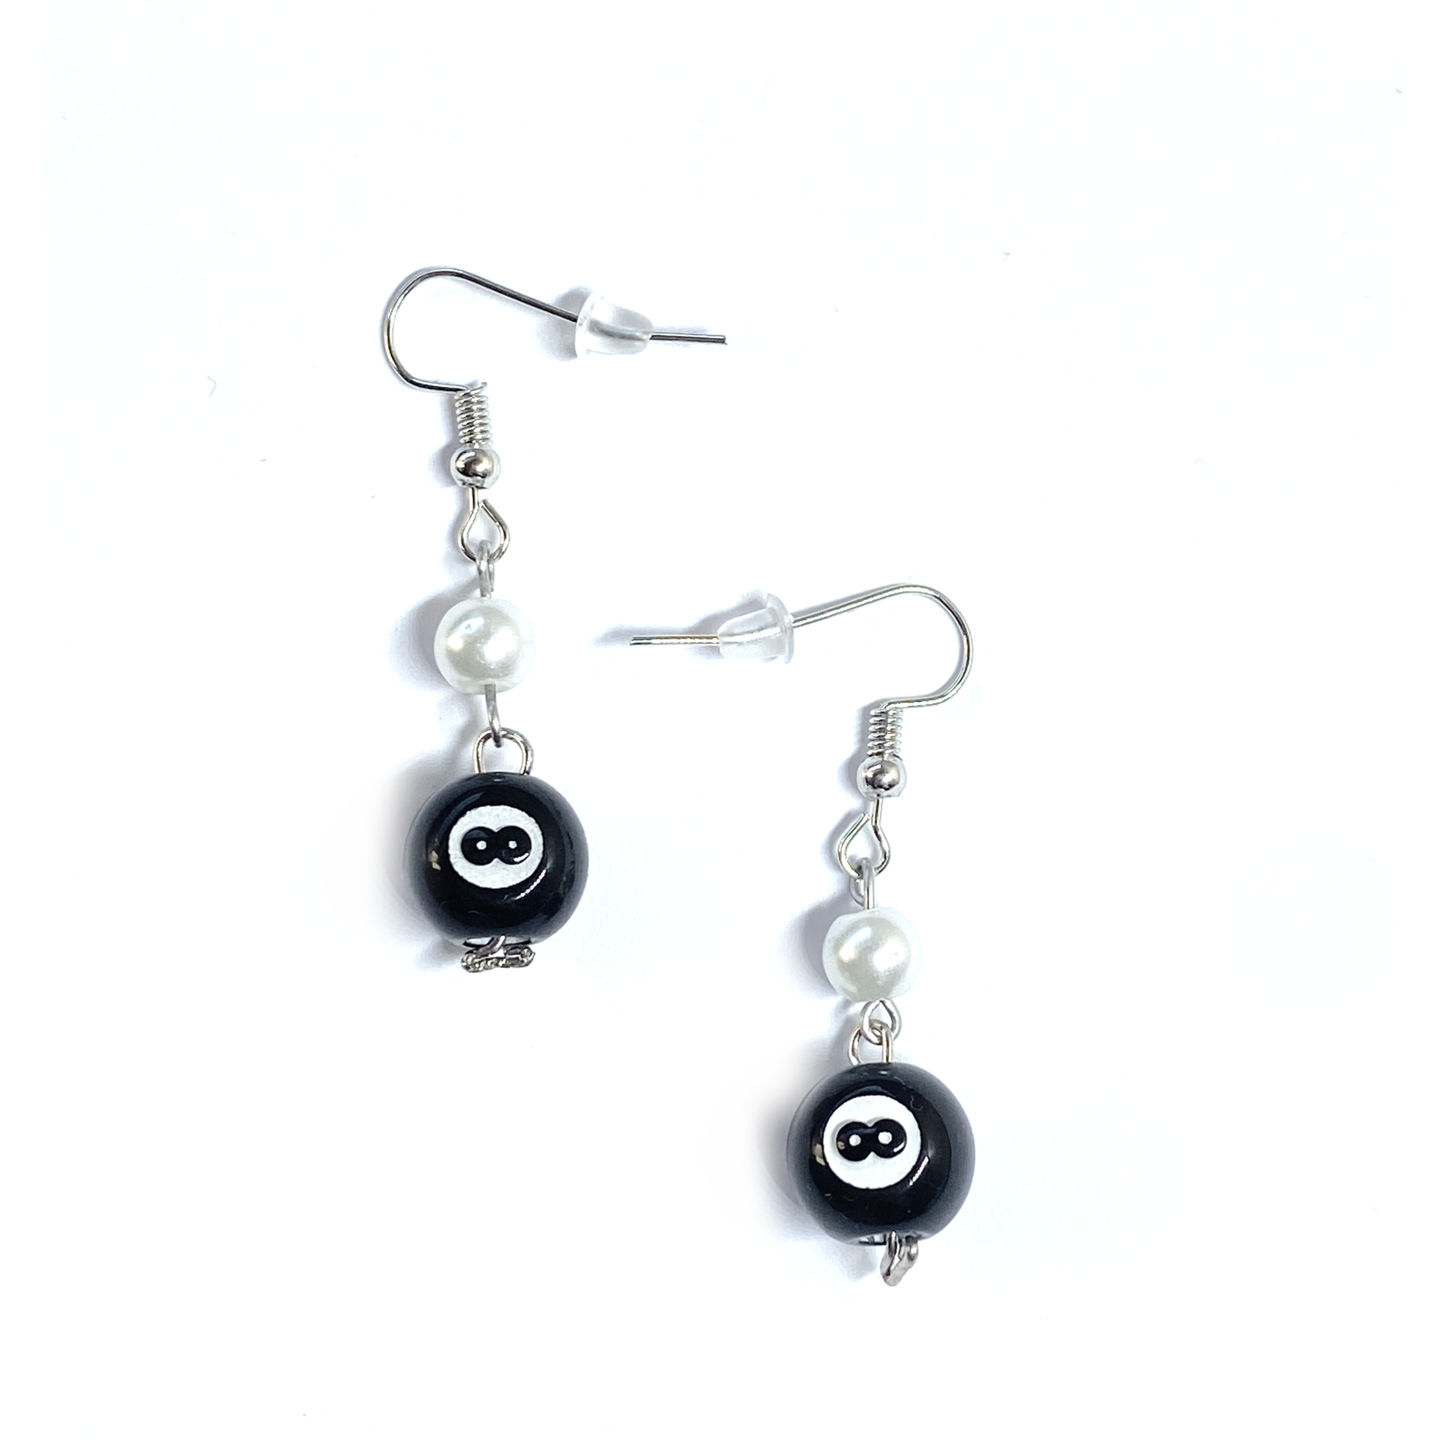 Earrings with an 8 Ball and Pearls